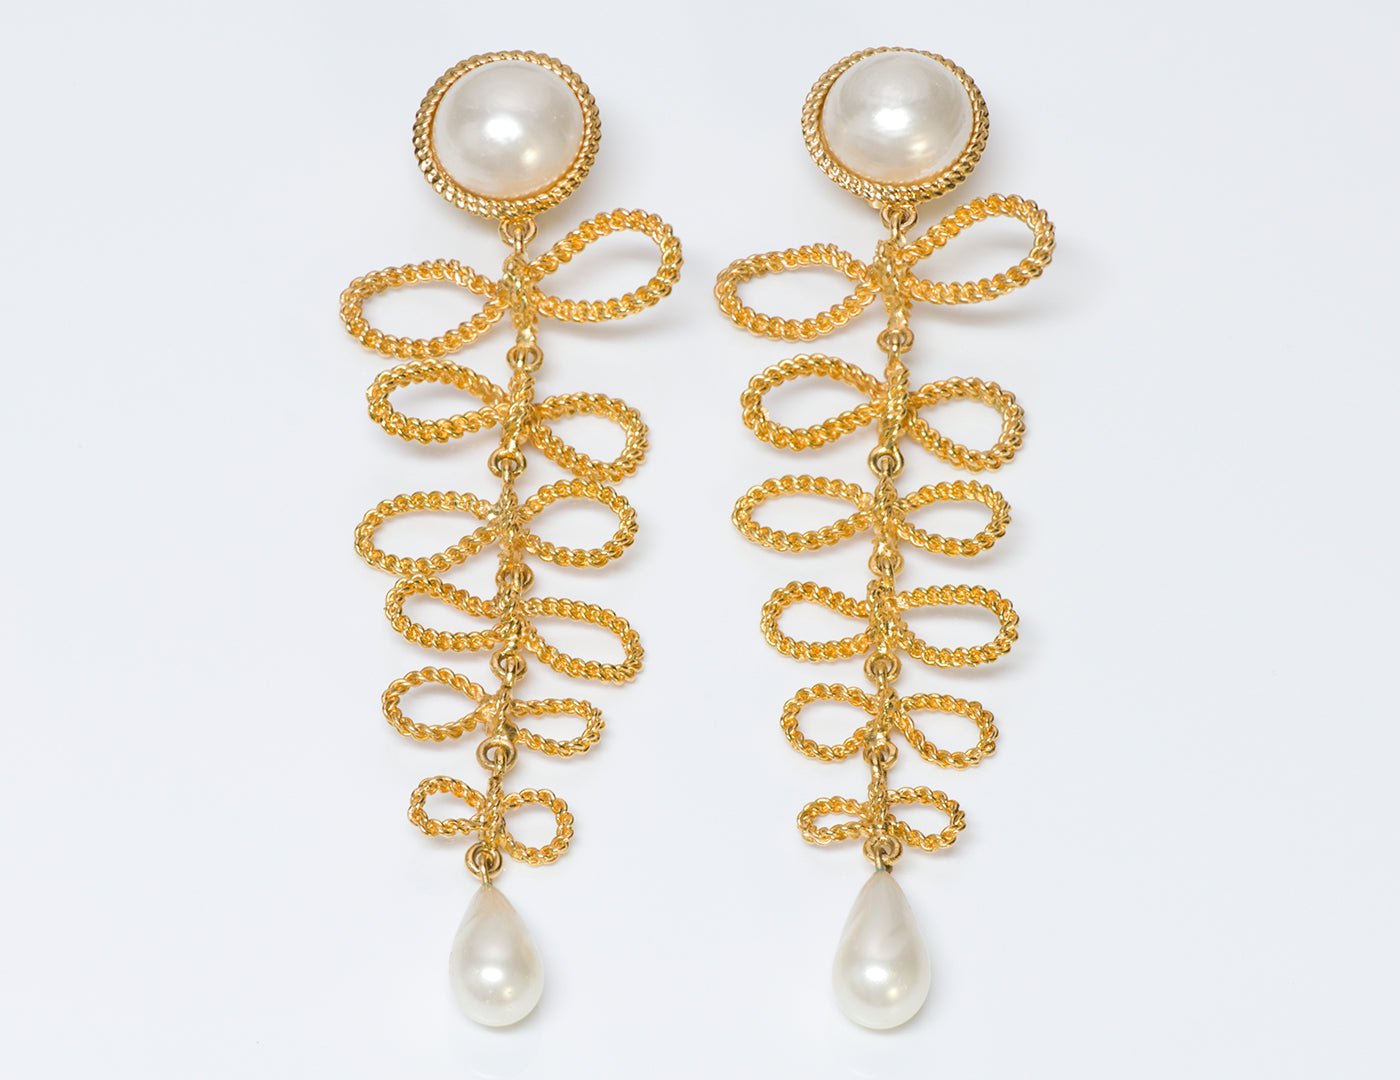 Vintage Chanel Paris Extra Long Bow Pearl Earrings